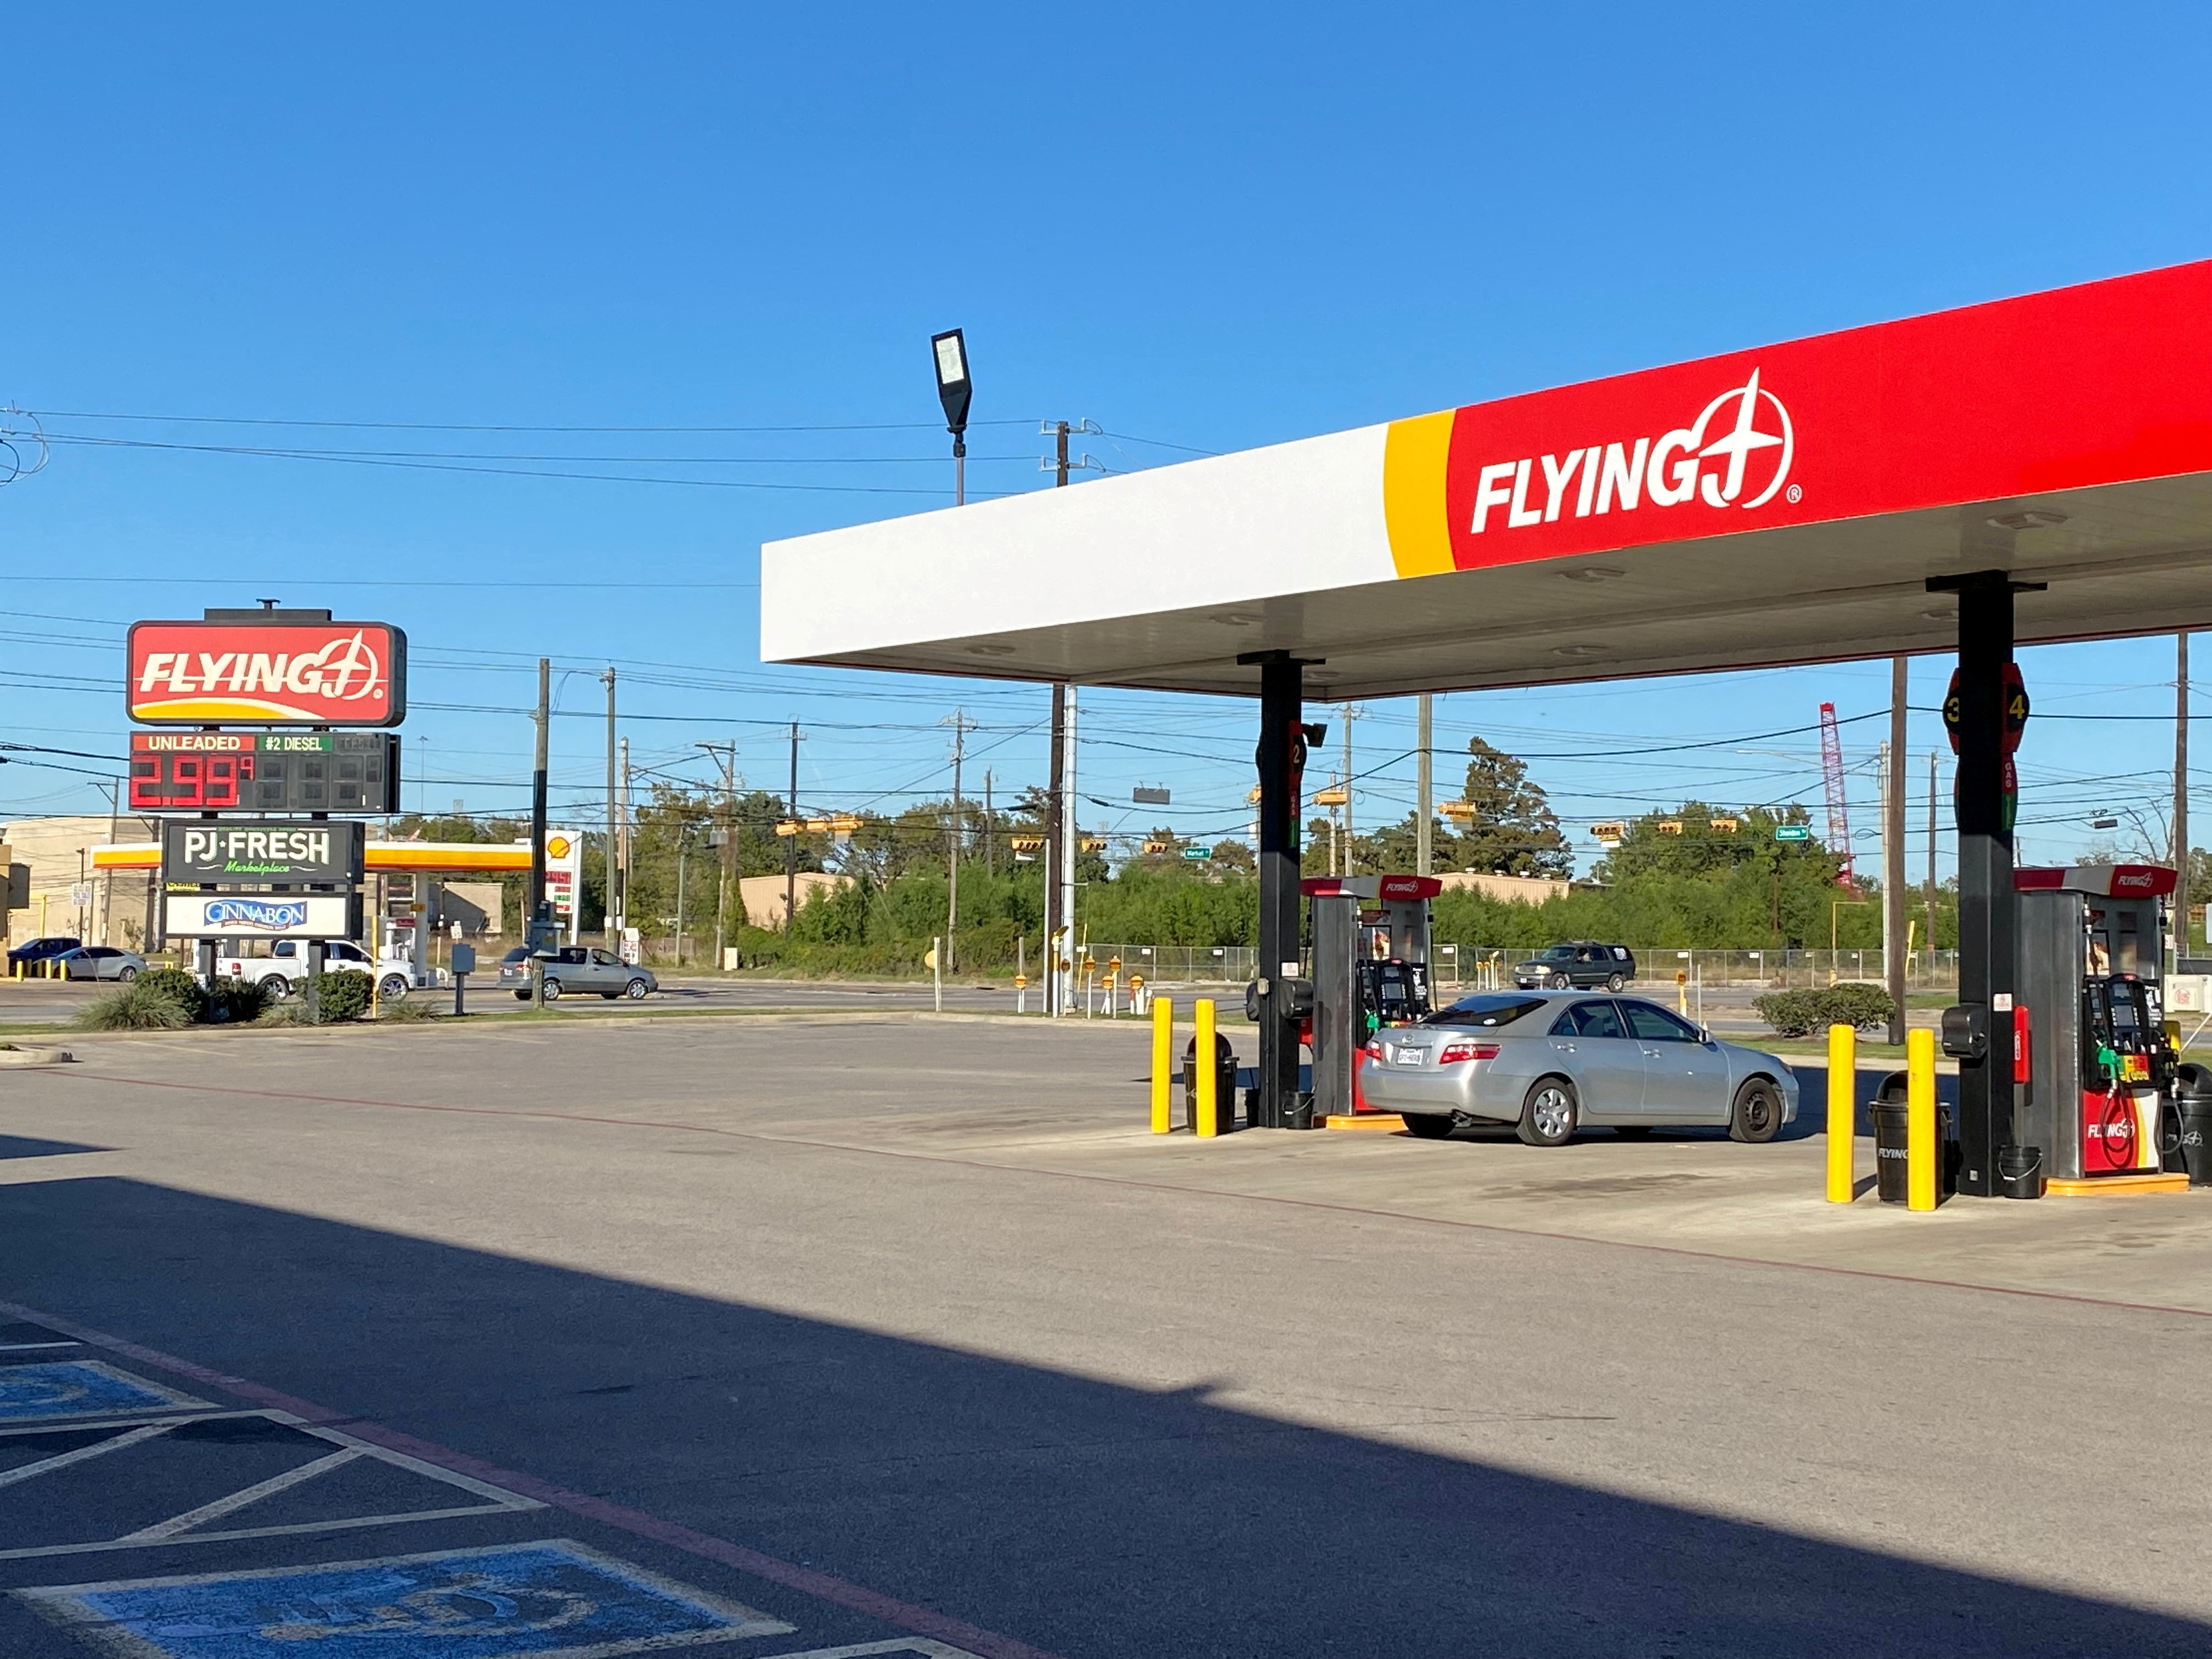 A Pilot Flying J travel center is pictured in Channelview, Texas, U.S.